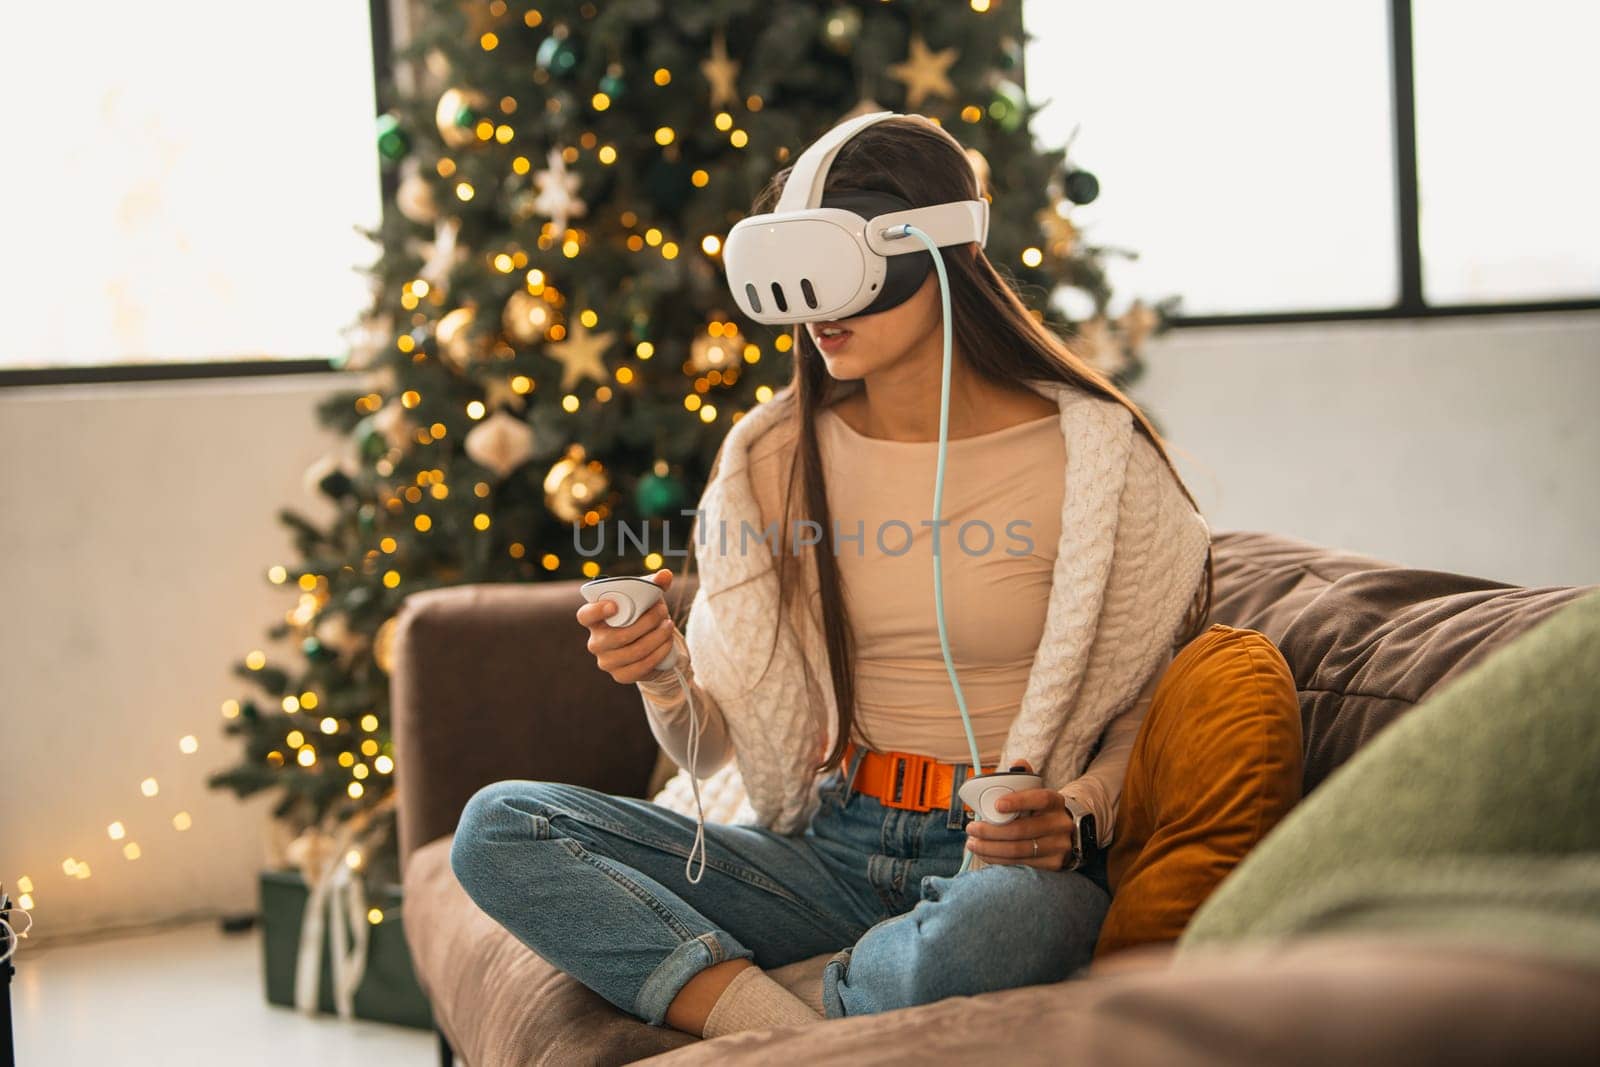 In the snug setting of a Christmas celebration at home, a fashionable young lady utilizes a virtual reality headset. High quality photo